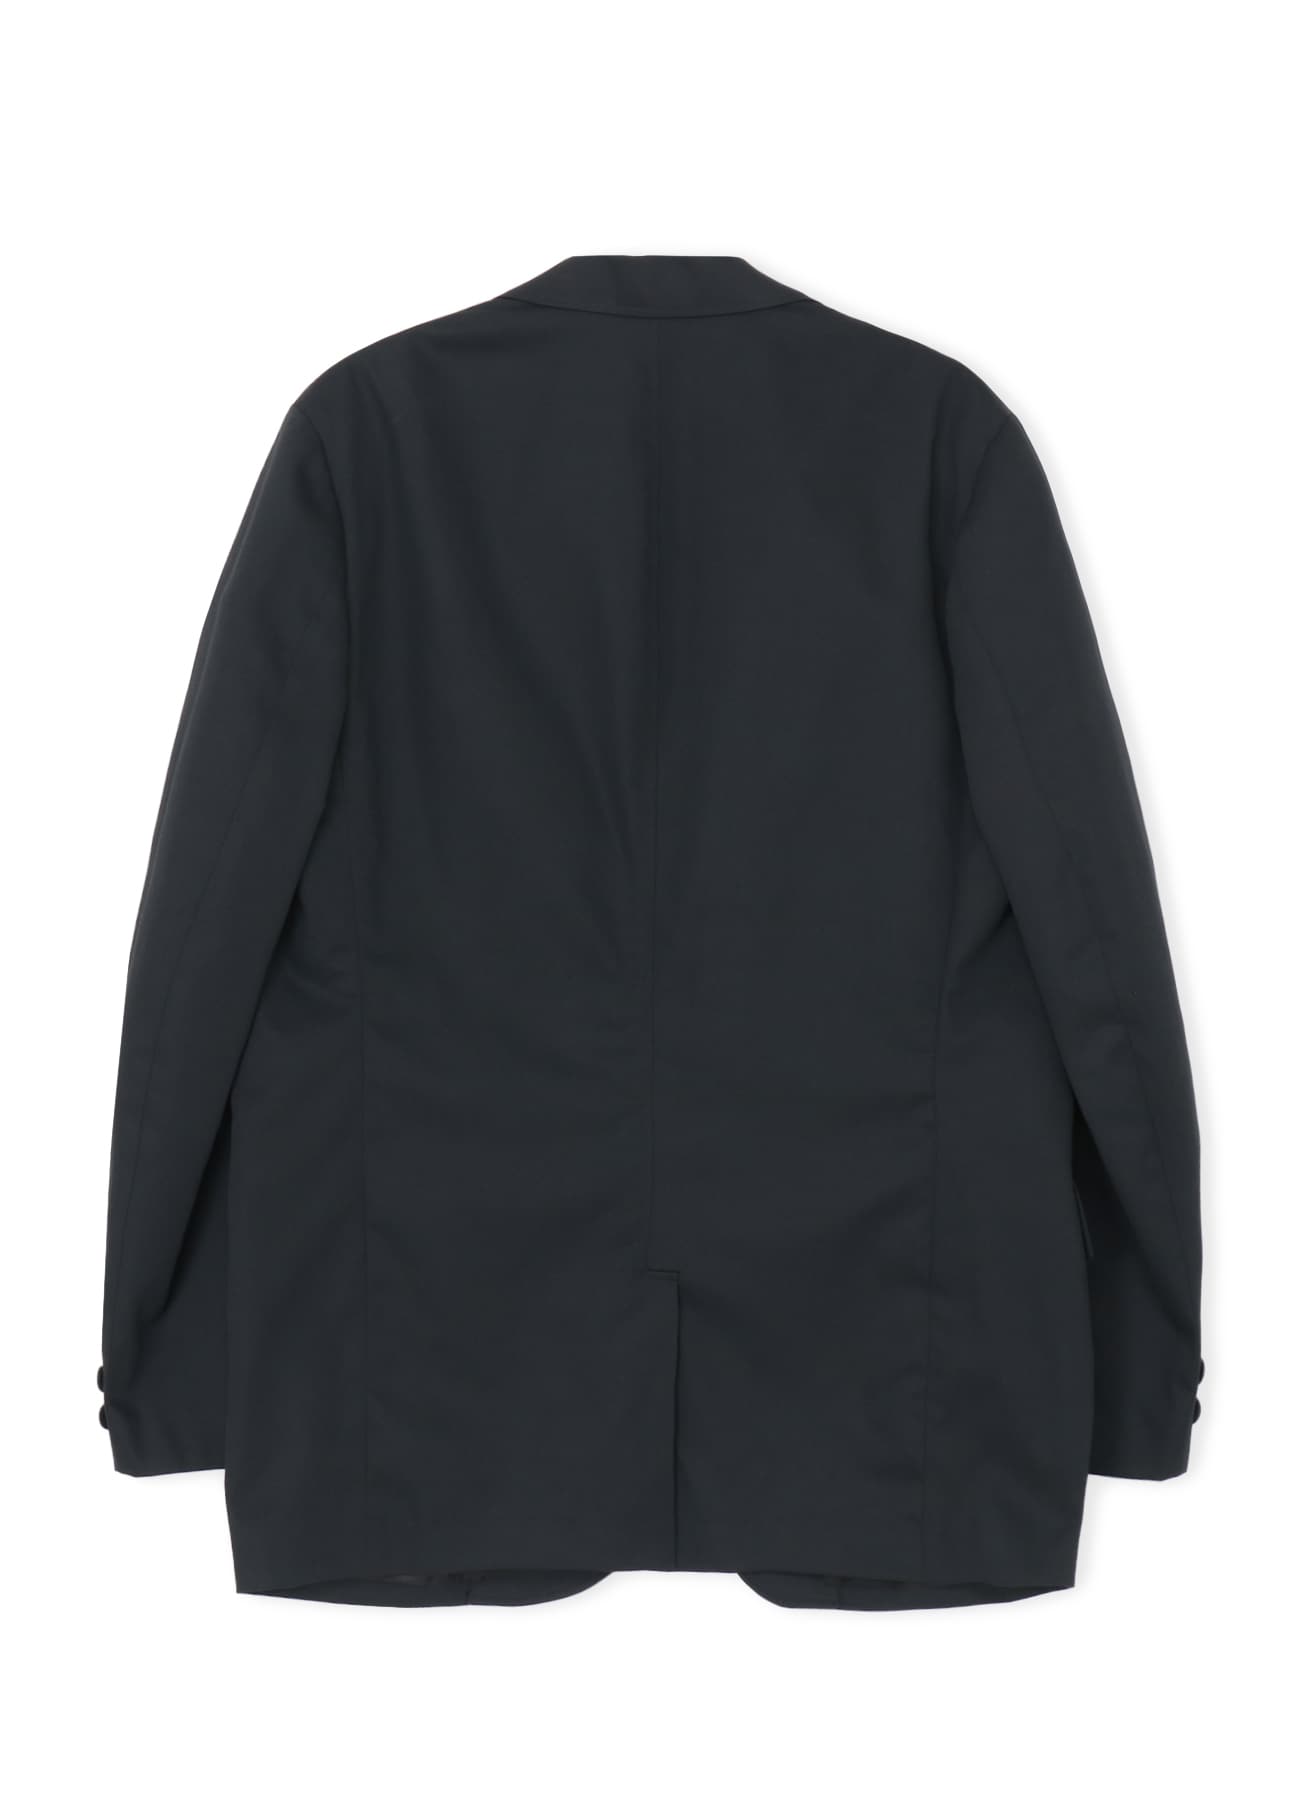 COTTON/POLYESTER TWILL 2-BUTTON JACKET